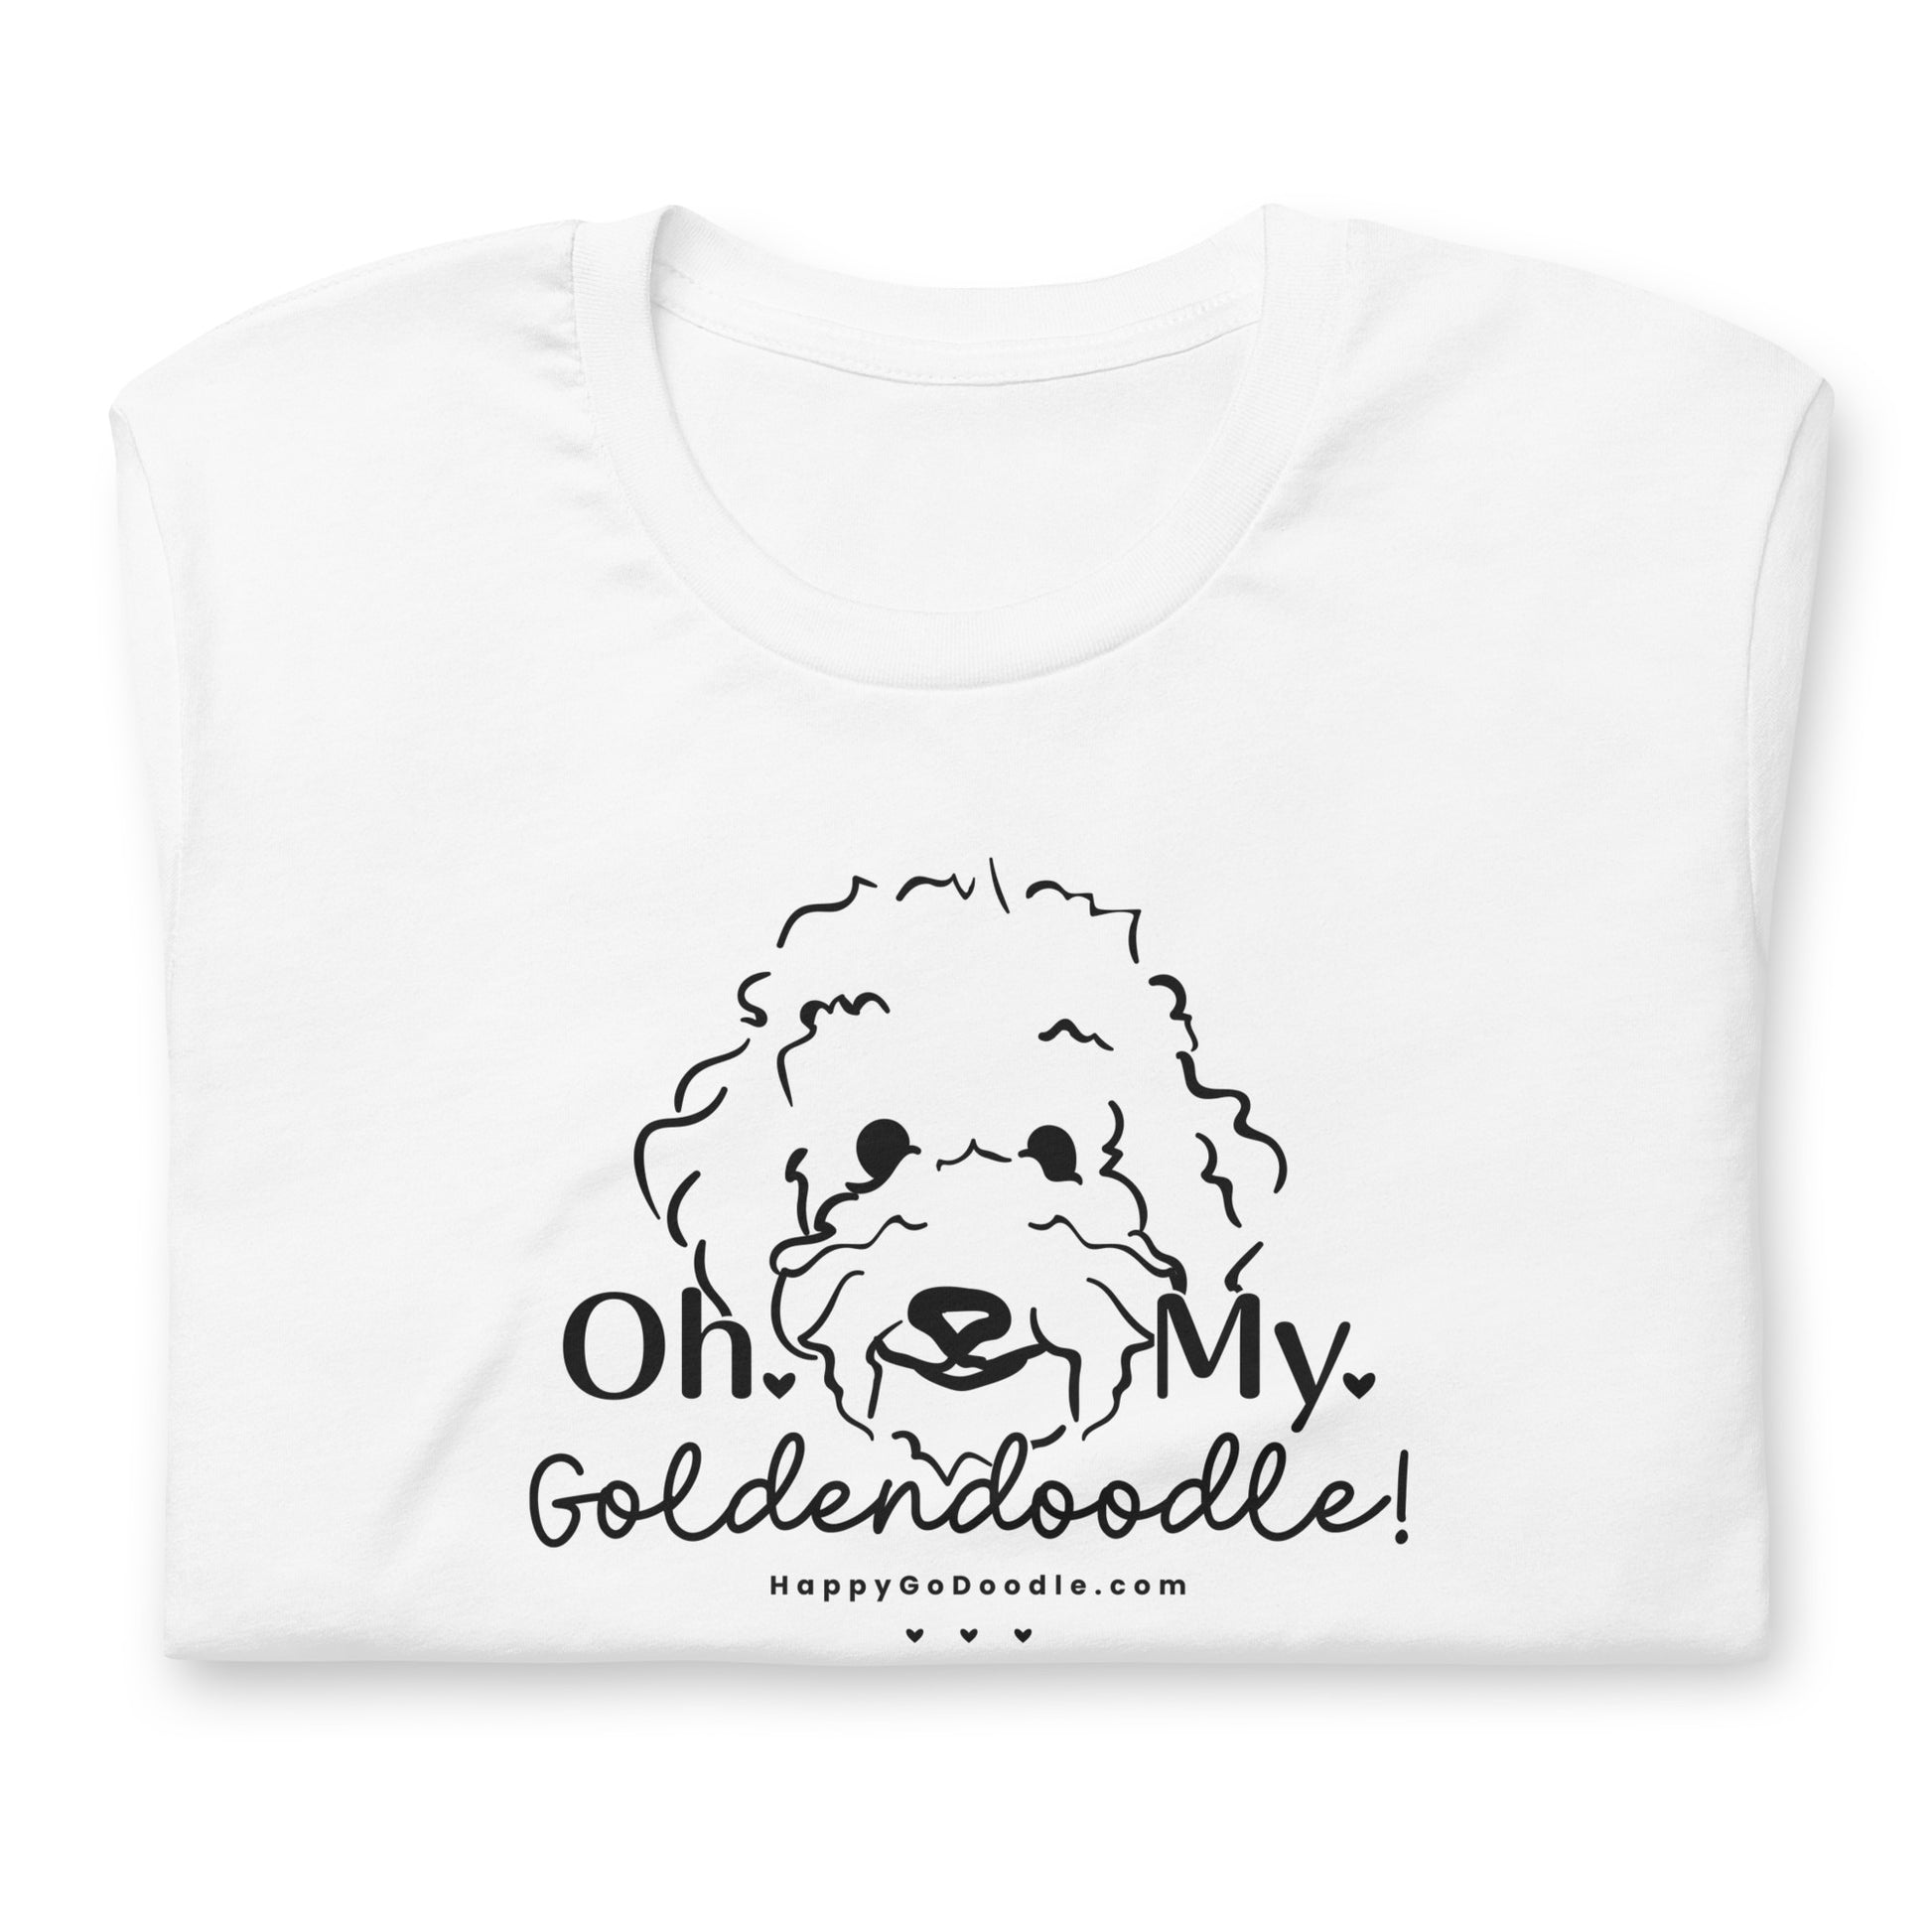 Goldendoodle t-shirt with Goldendoodle face and words "Oh My Goldendoodle" in white color